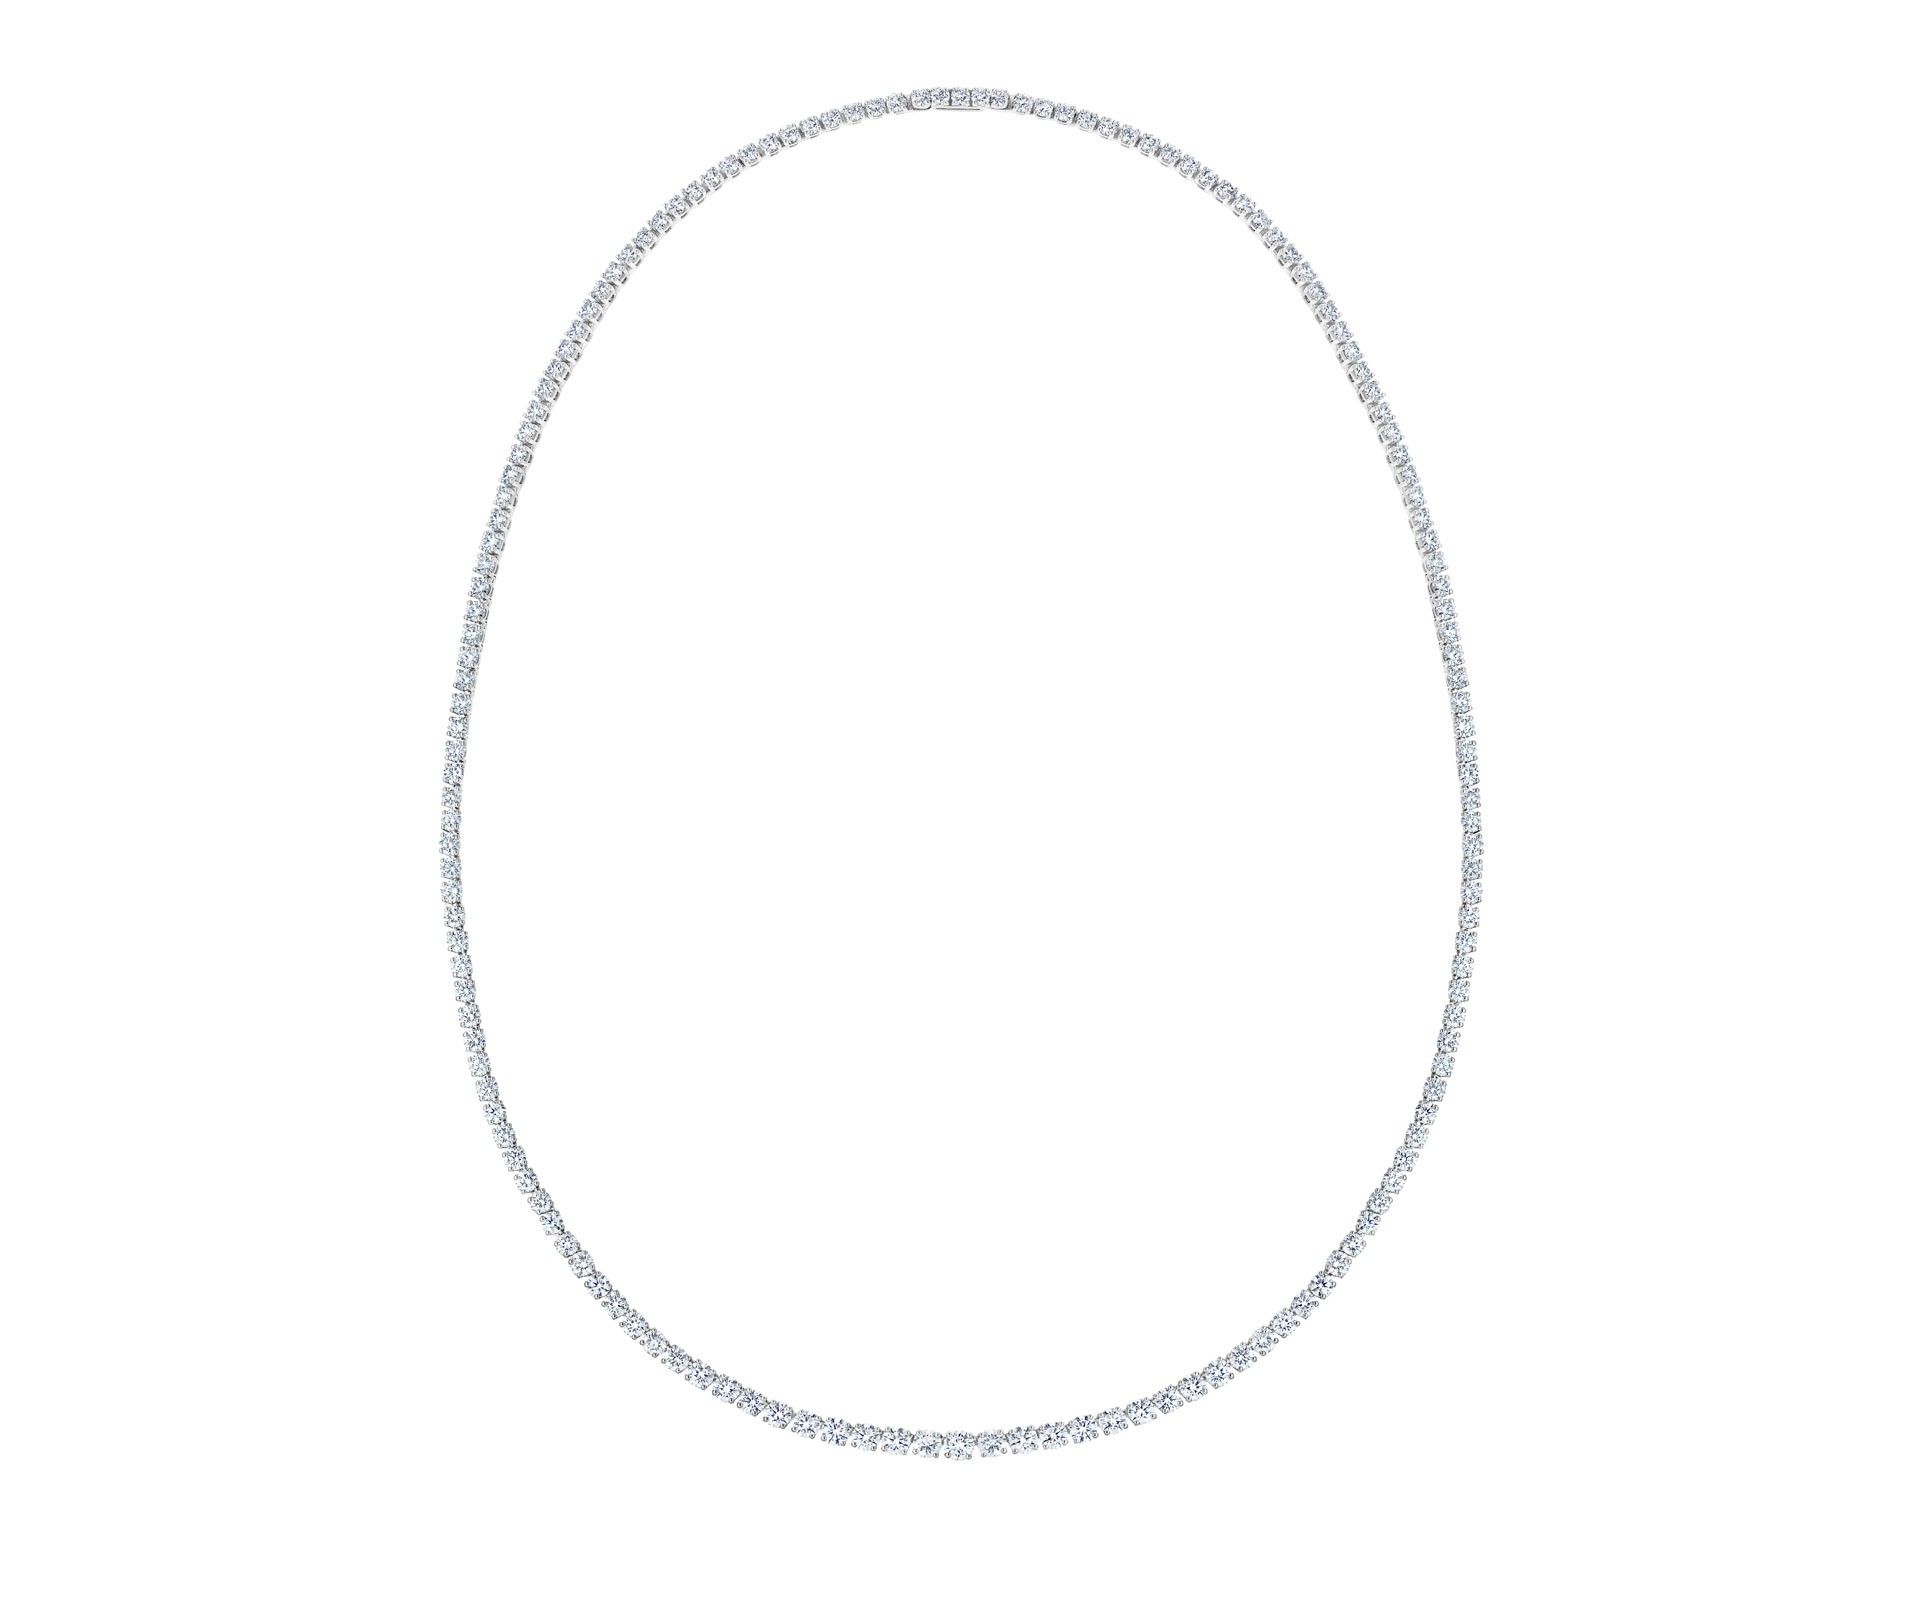 Db Classic Diamond Line Necklace In Most Recent Round Brilliant Diamond Straightline Necklaces (View 18 of 25)